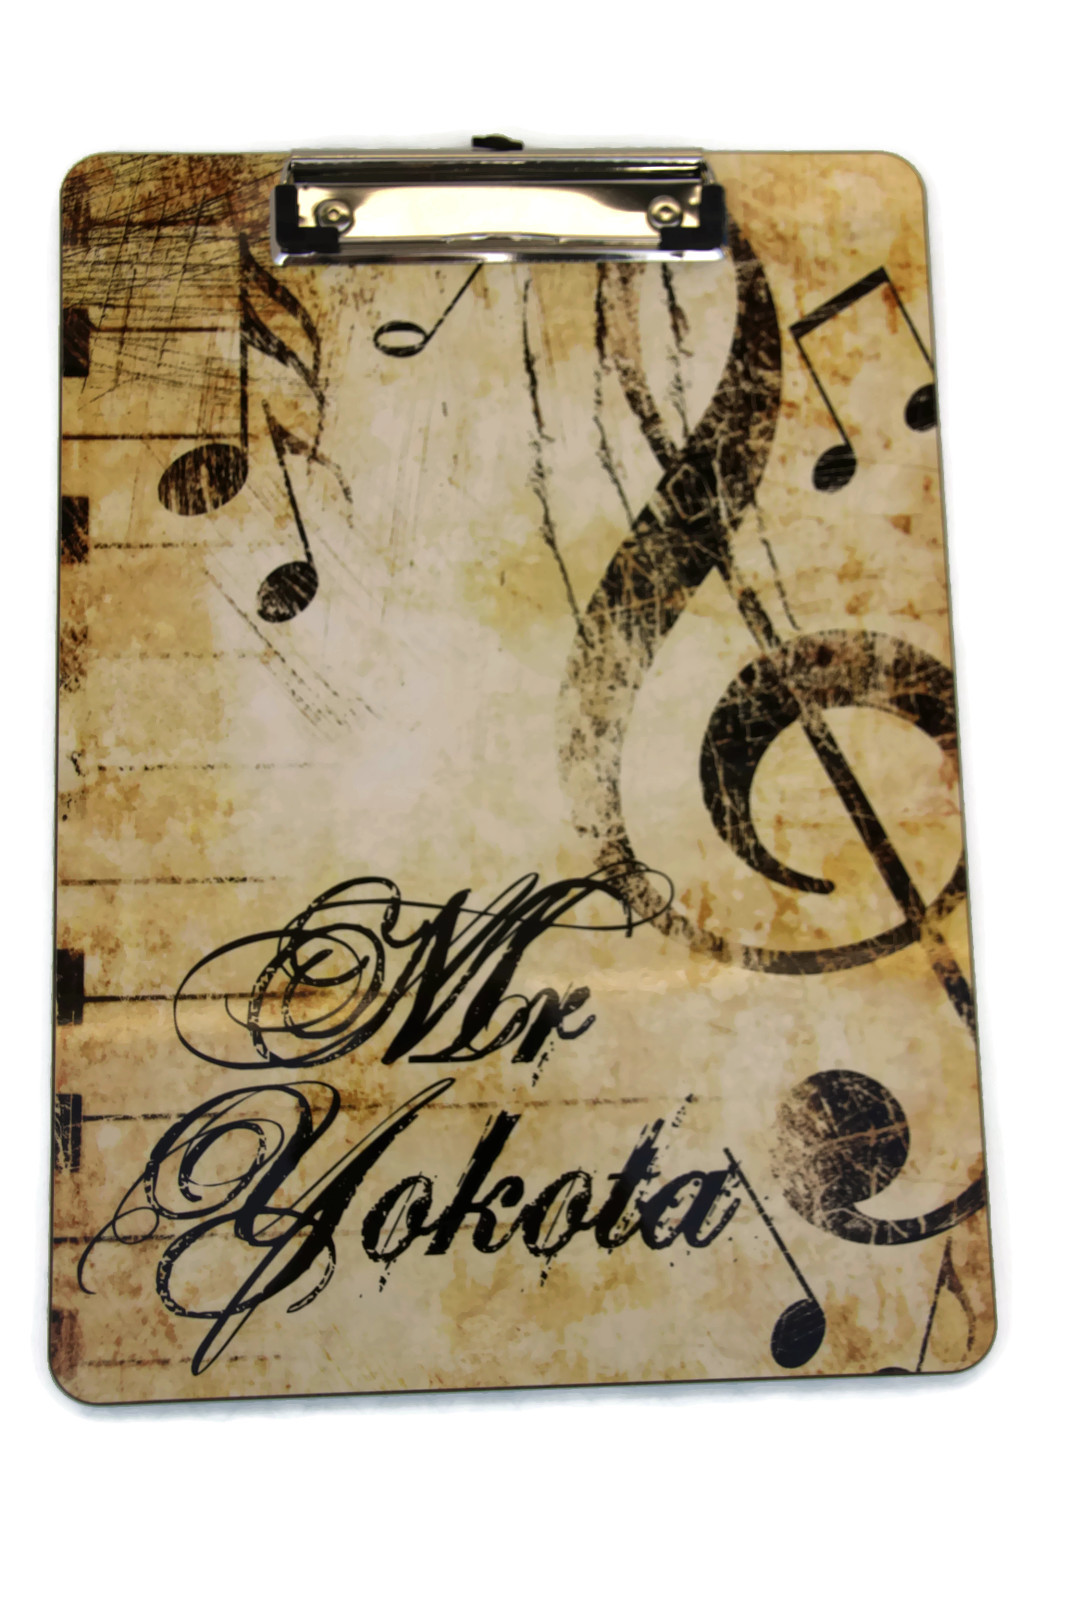 Music Clipboard made with sublimation printing